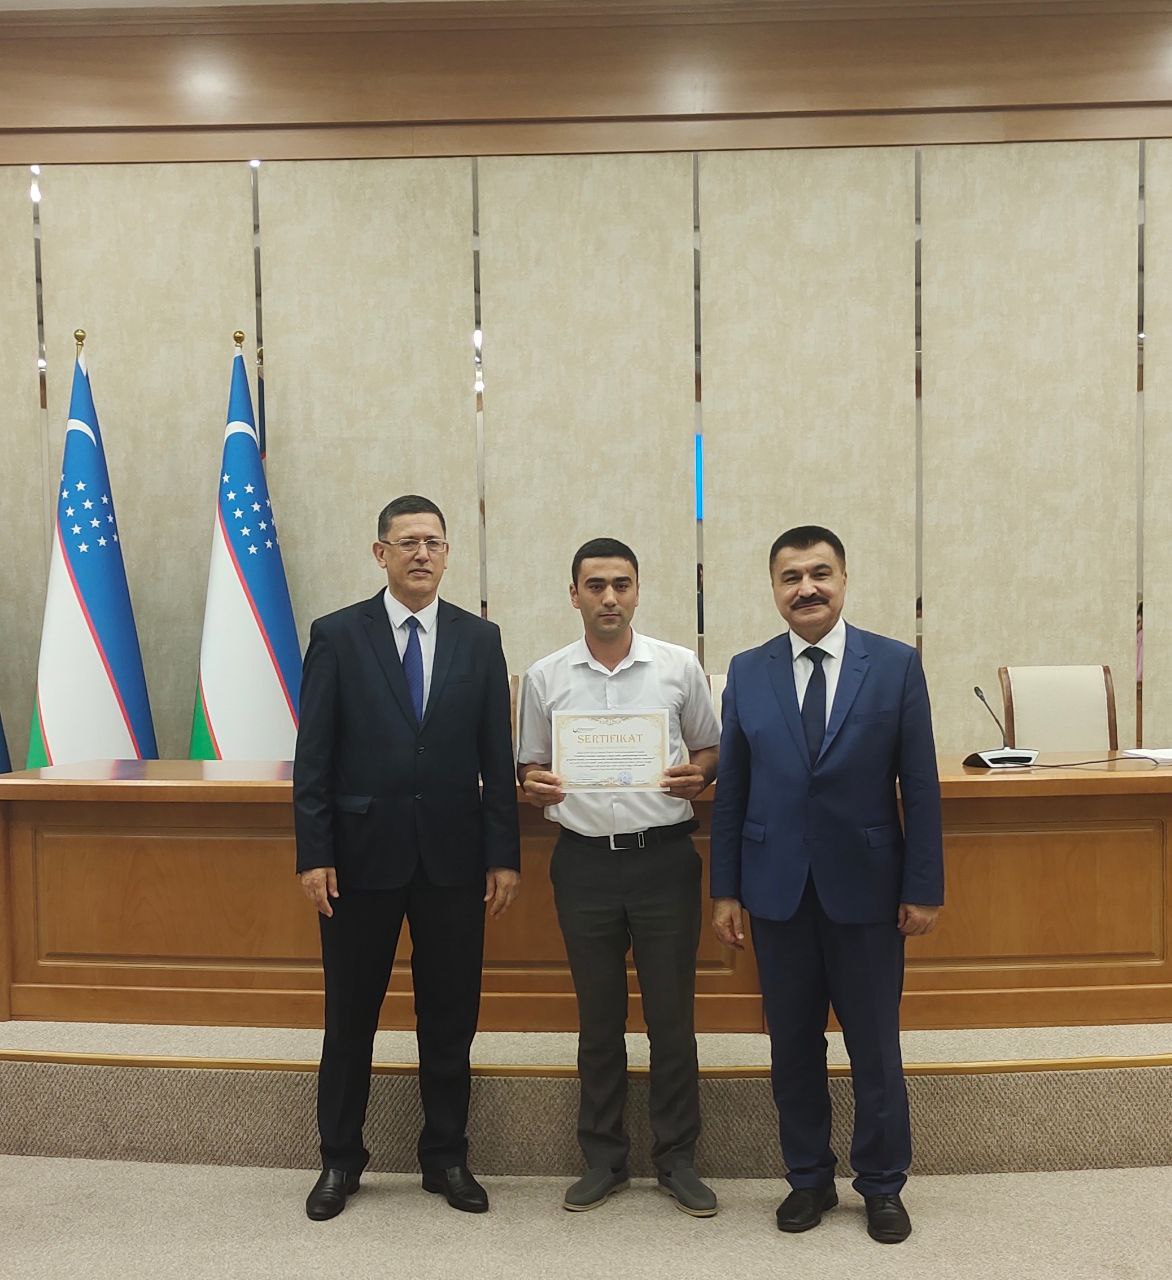 THE DOCTORAL STUDENT OF THE INSTITUTE BECAME A SCHOLARSHIP WINNER FROM “EL-YURT UMIDI” FOUNDATION